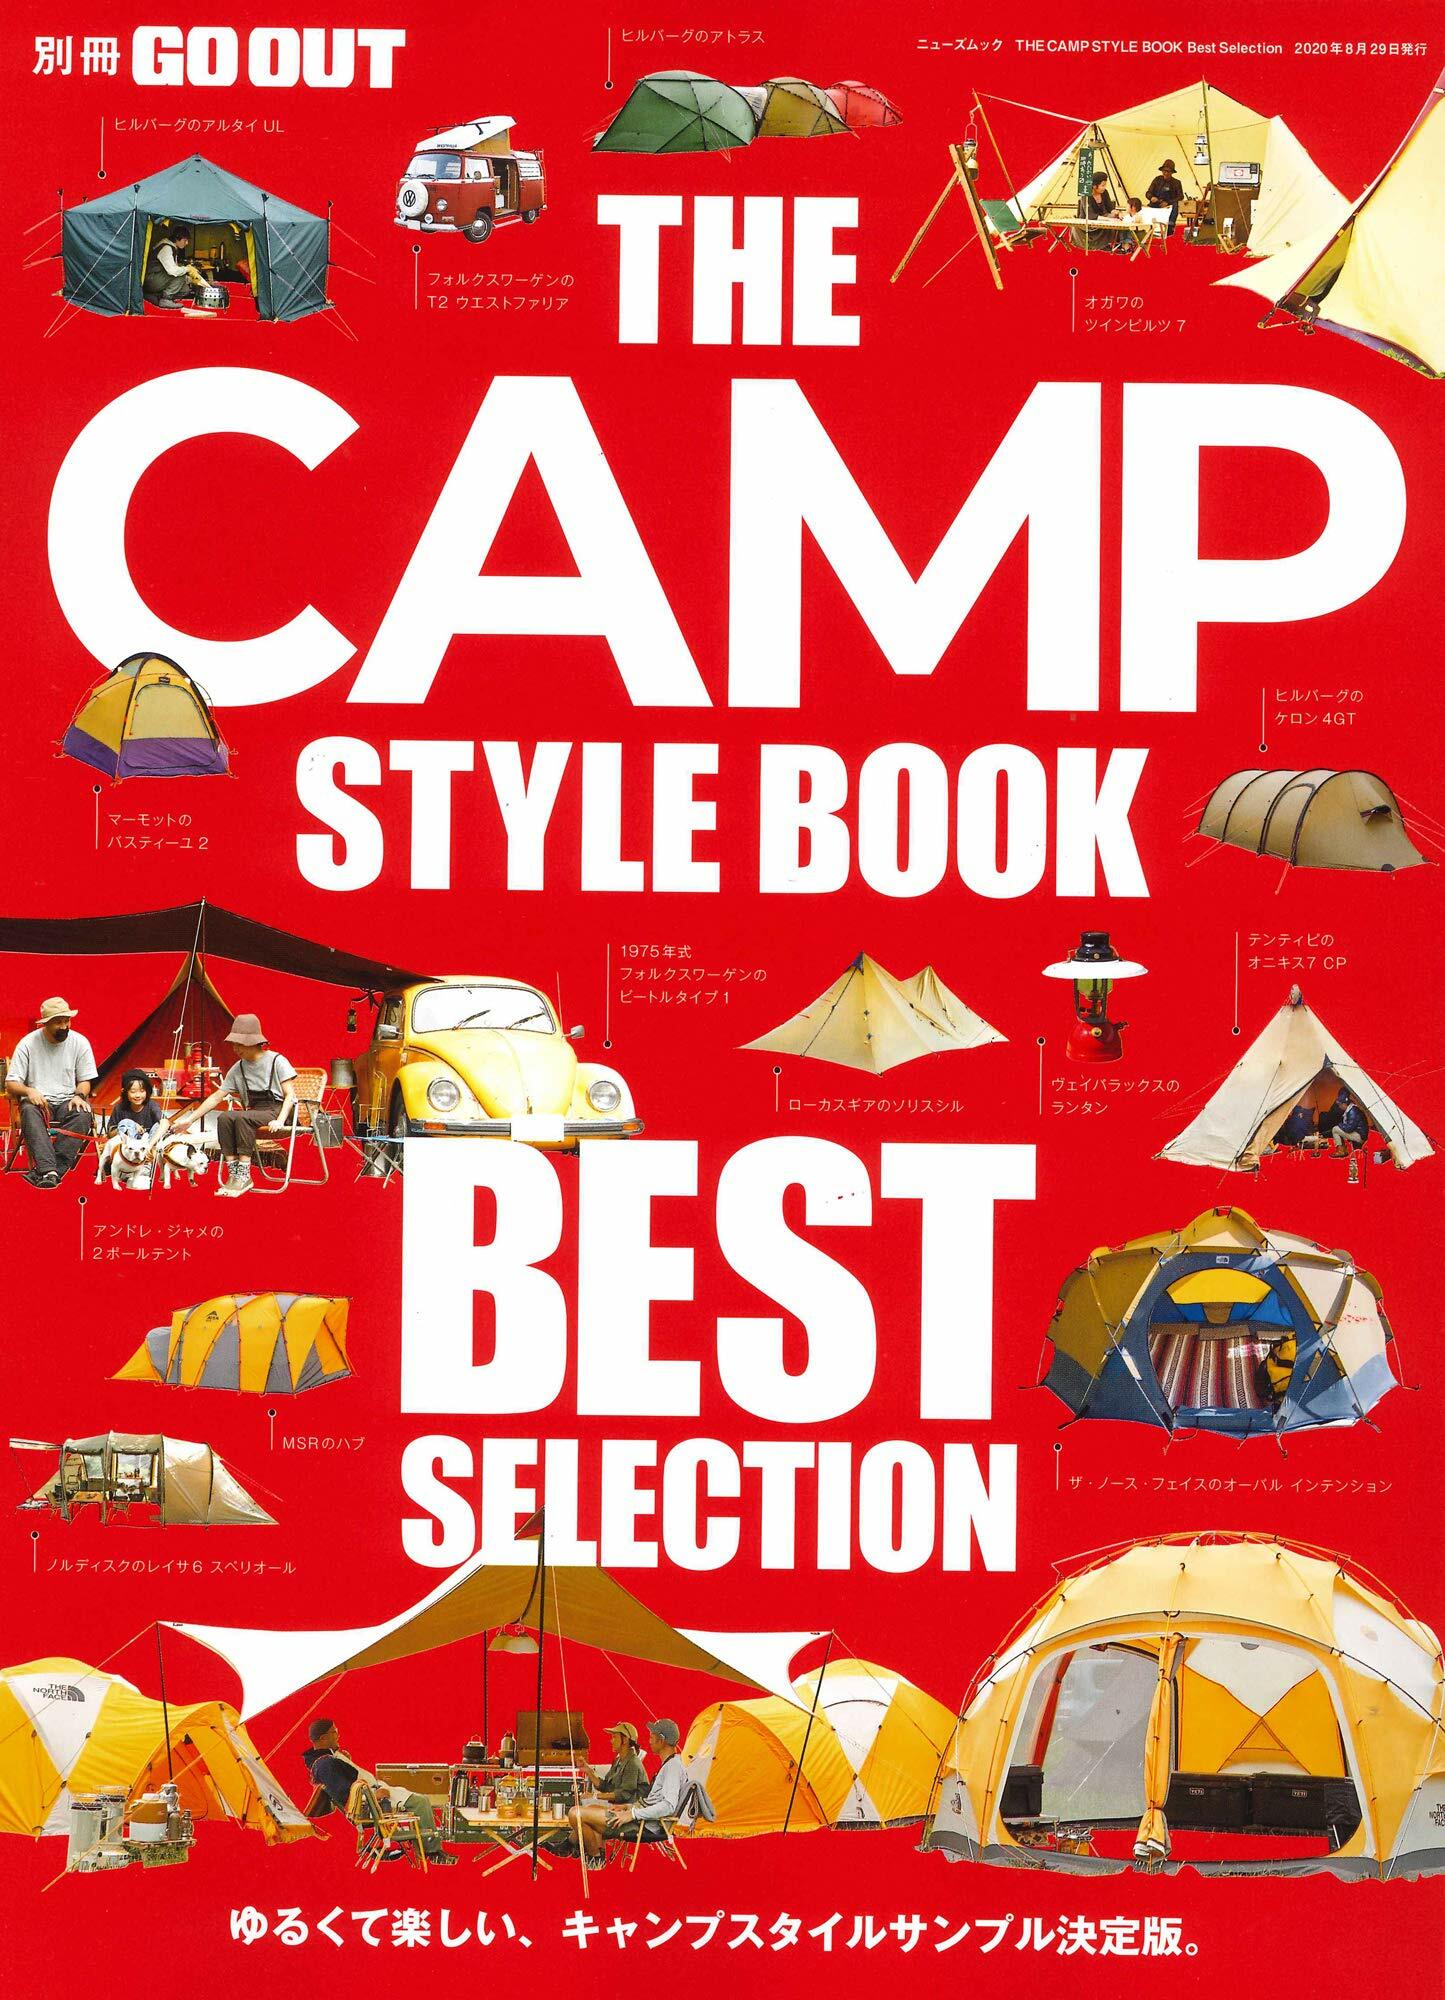 THE CAMP STYLE BOOK Best Selection (別冊GO OUT)